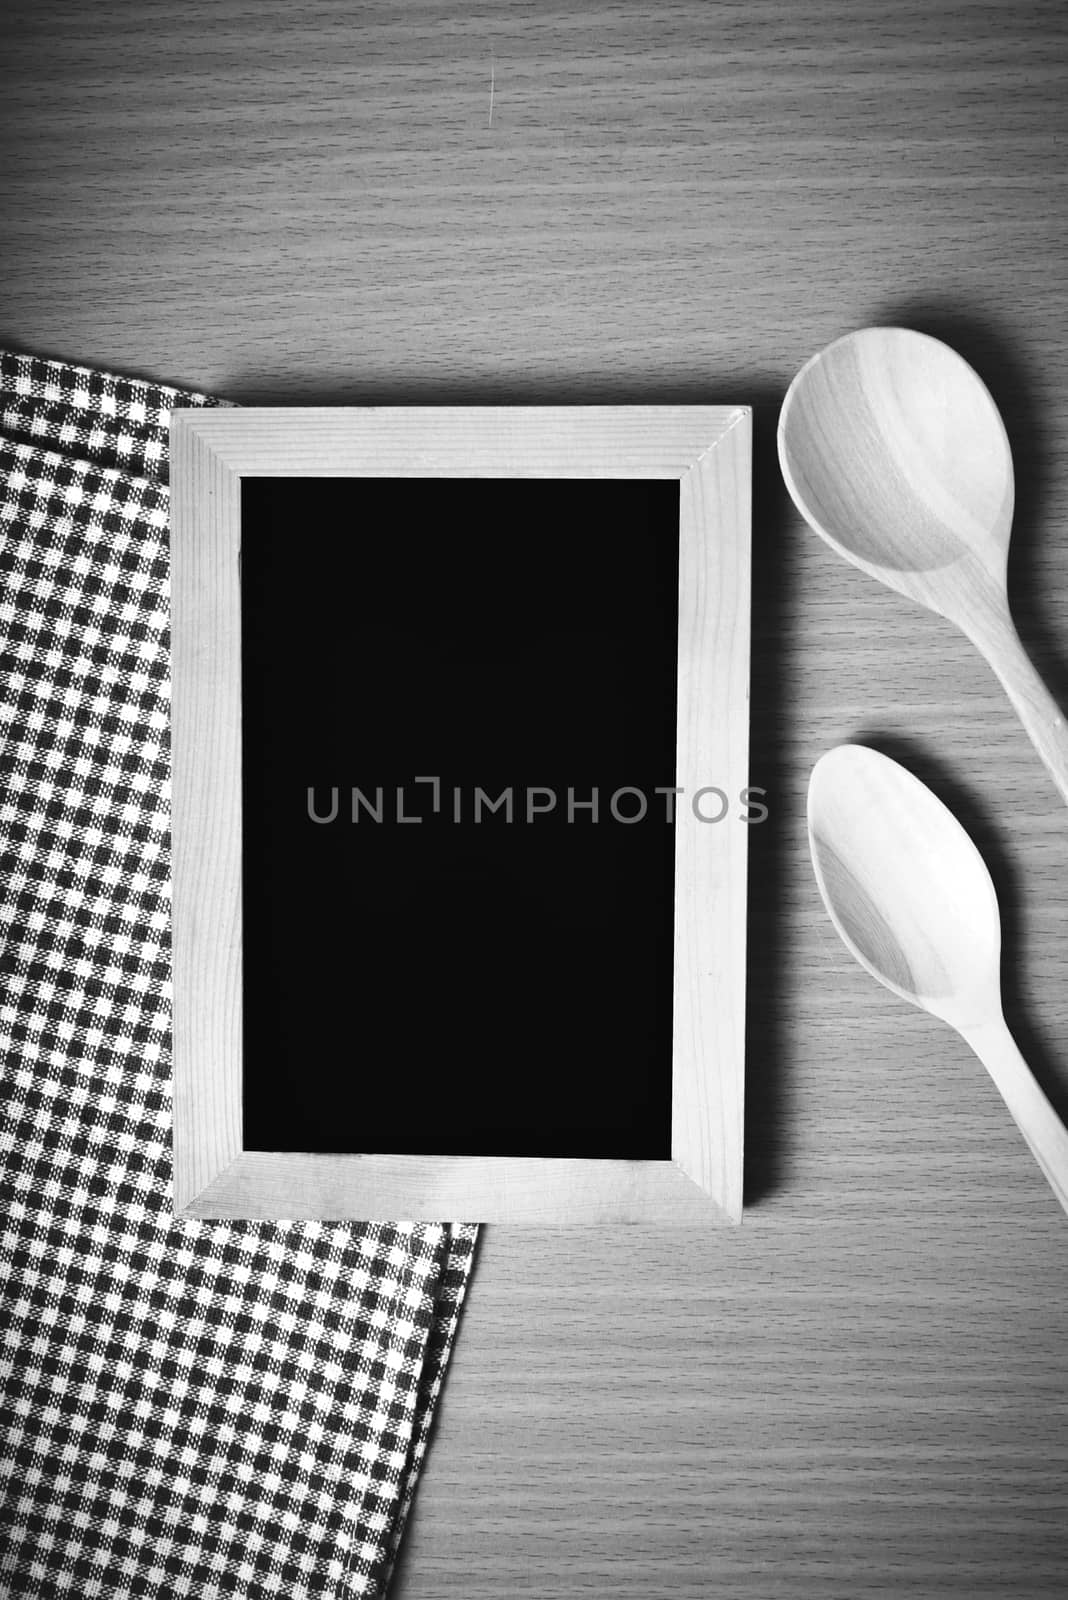 blackboard and wooden spoon black and white color tone style by ammza12